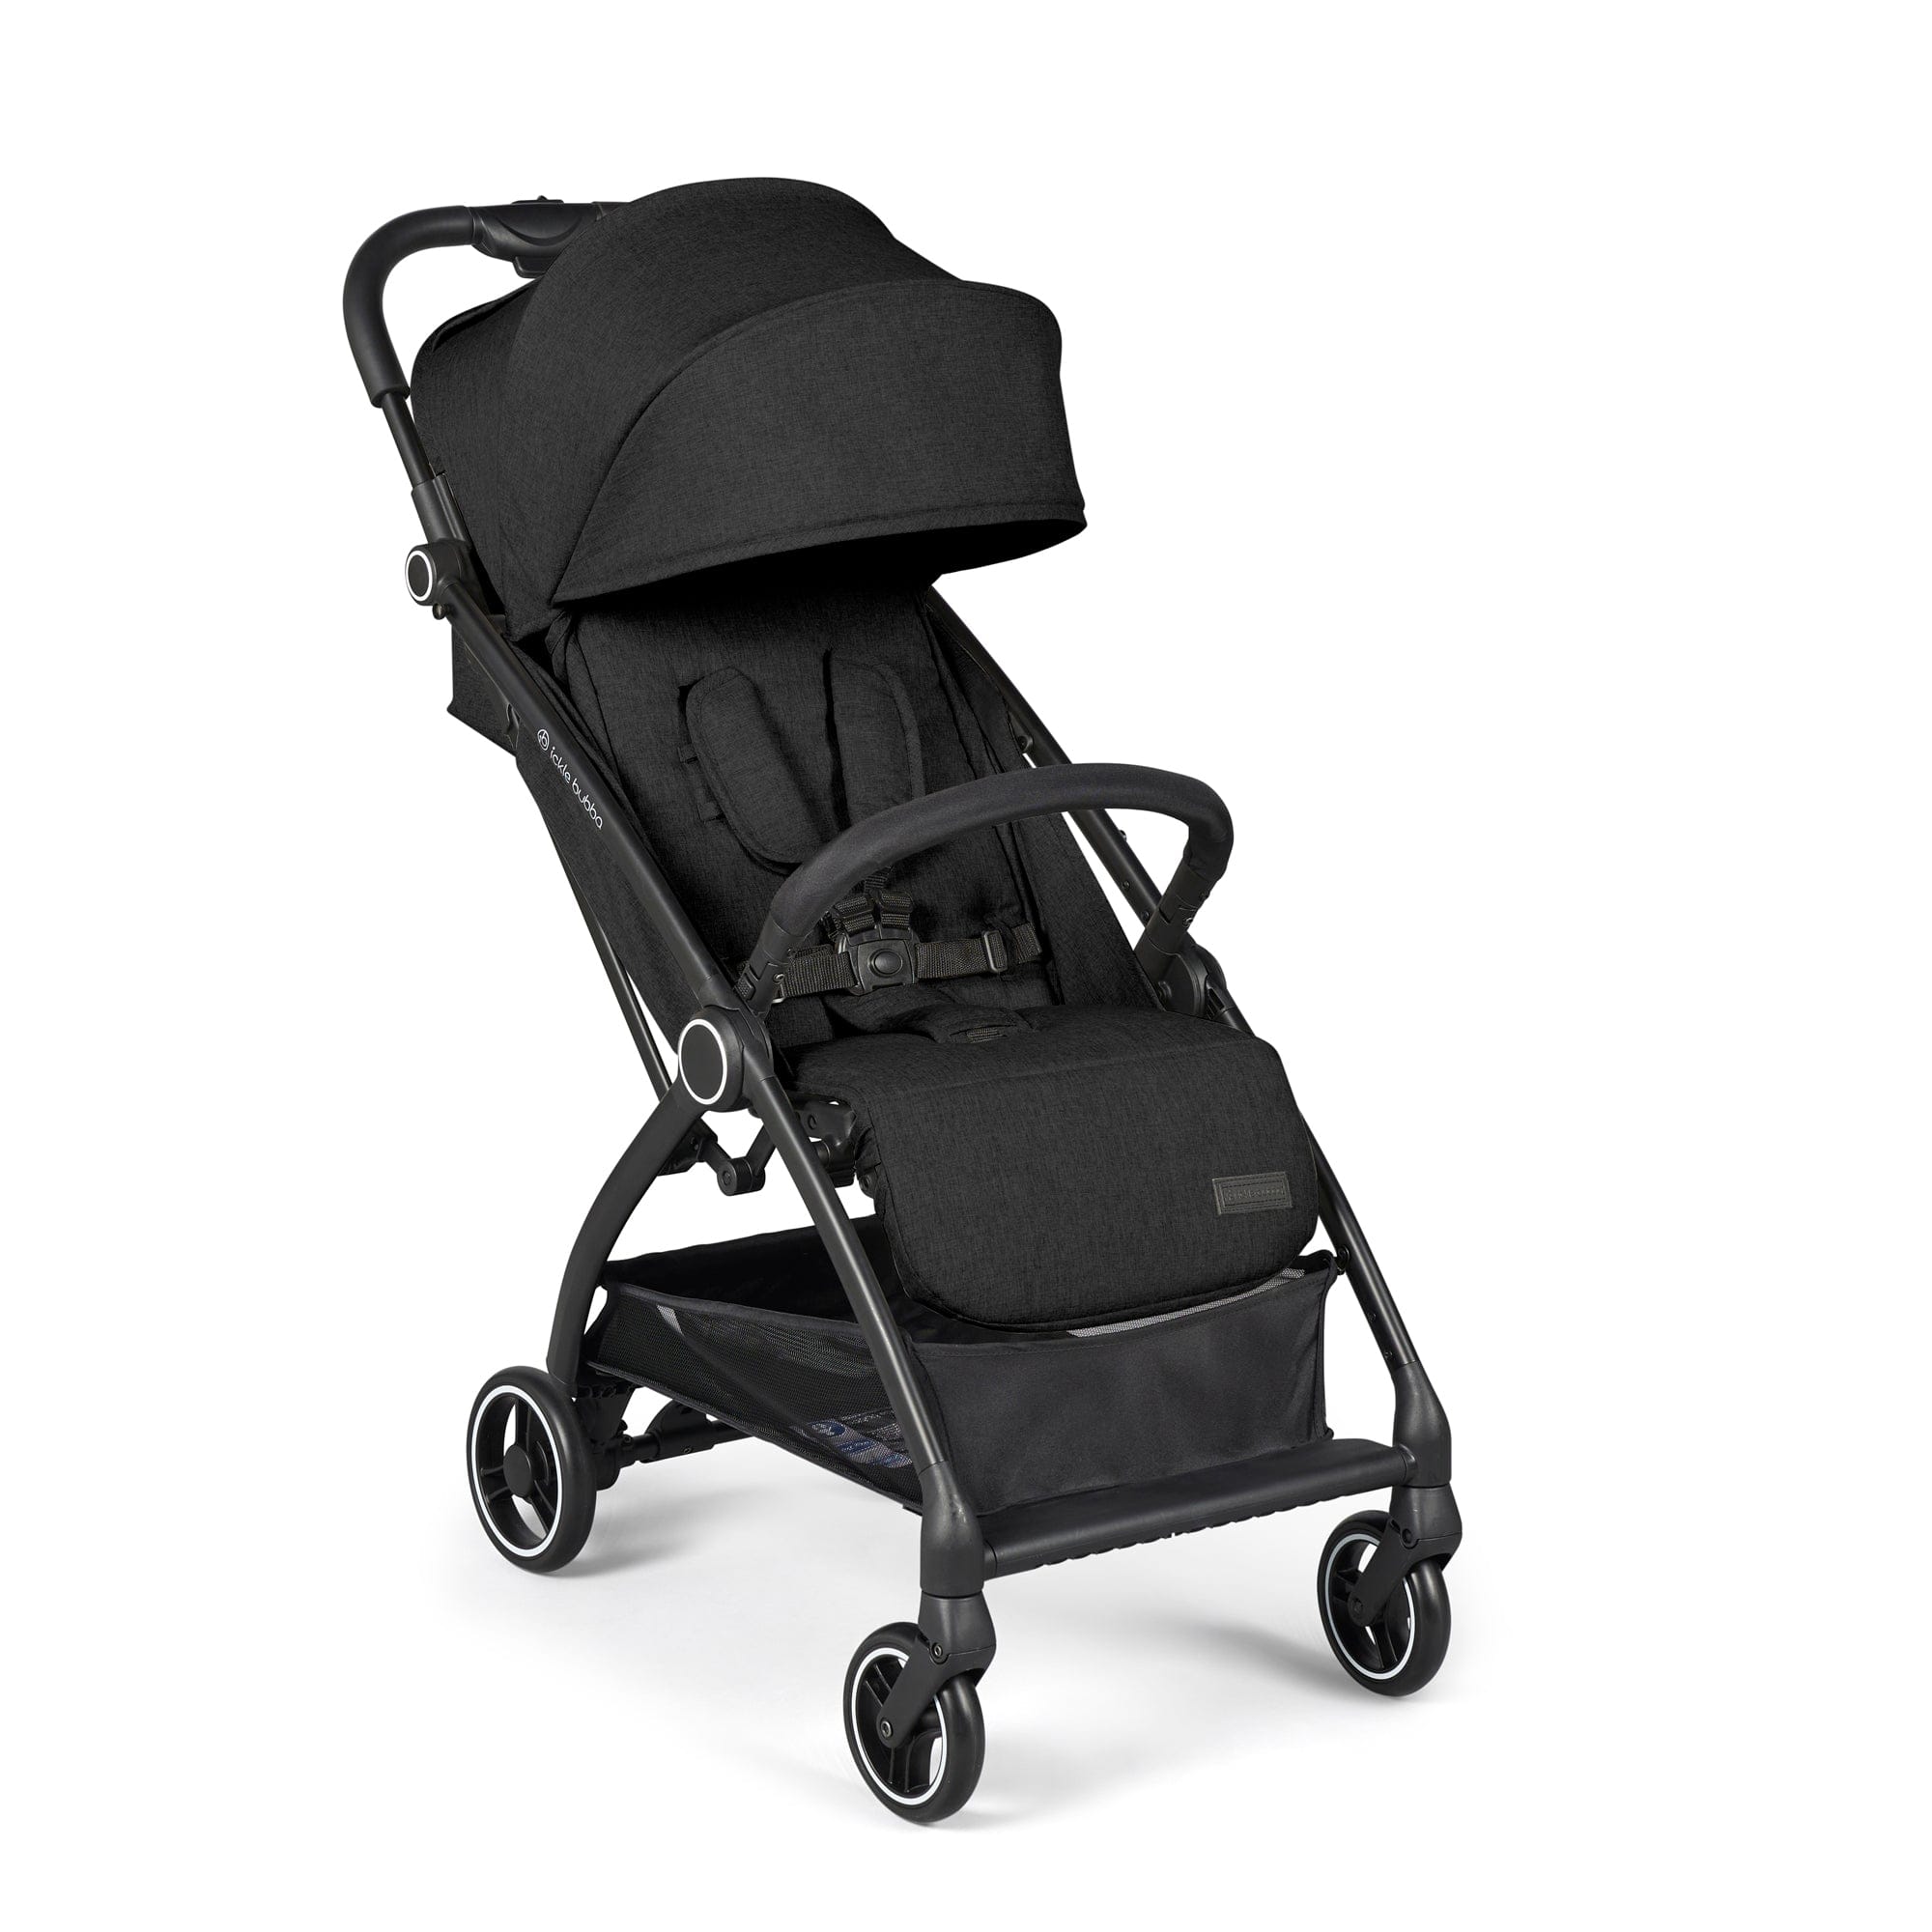 Ickle Bubba Aries Max Autofold Stroller in Black Pushchairs & Buggies 15-005-200-001 5056515030631